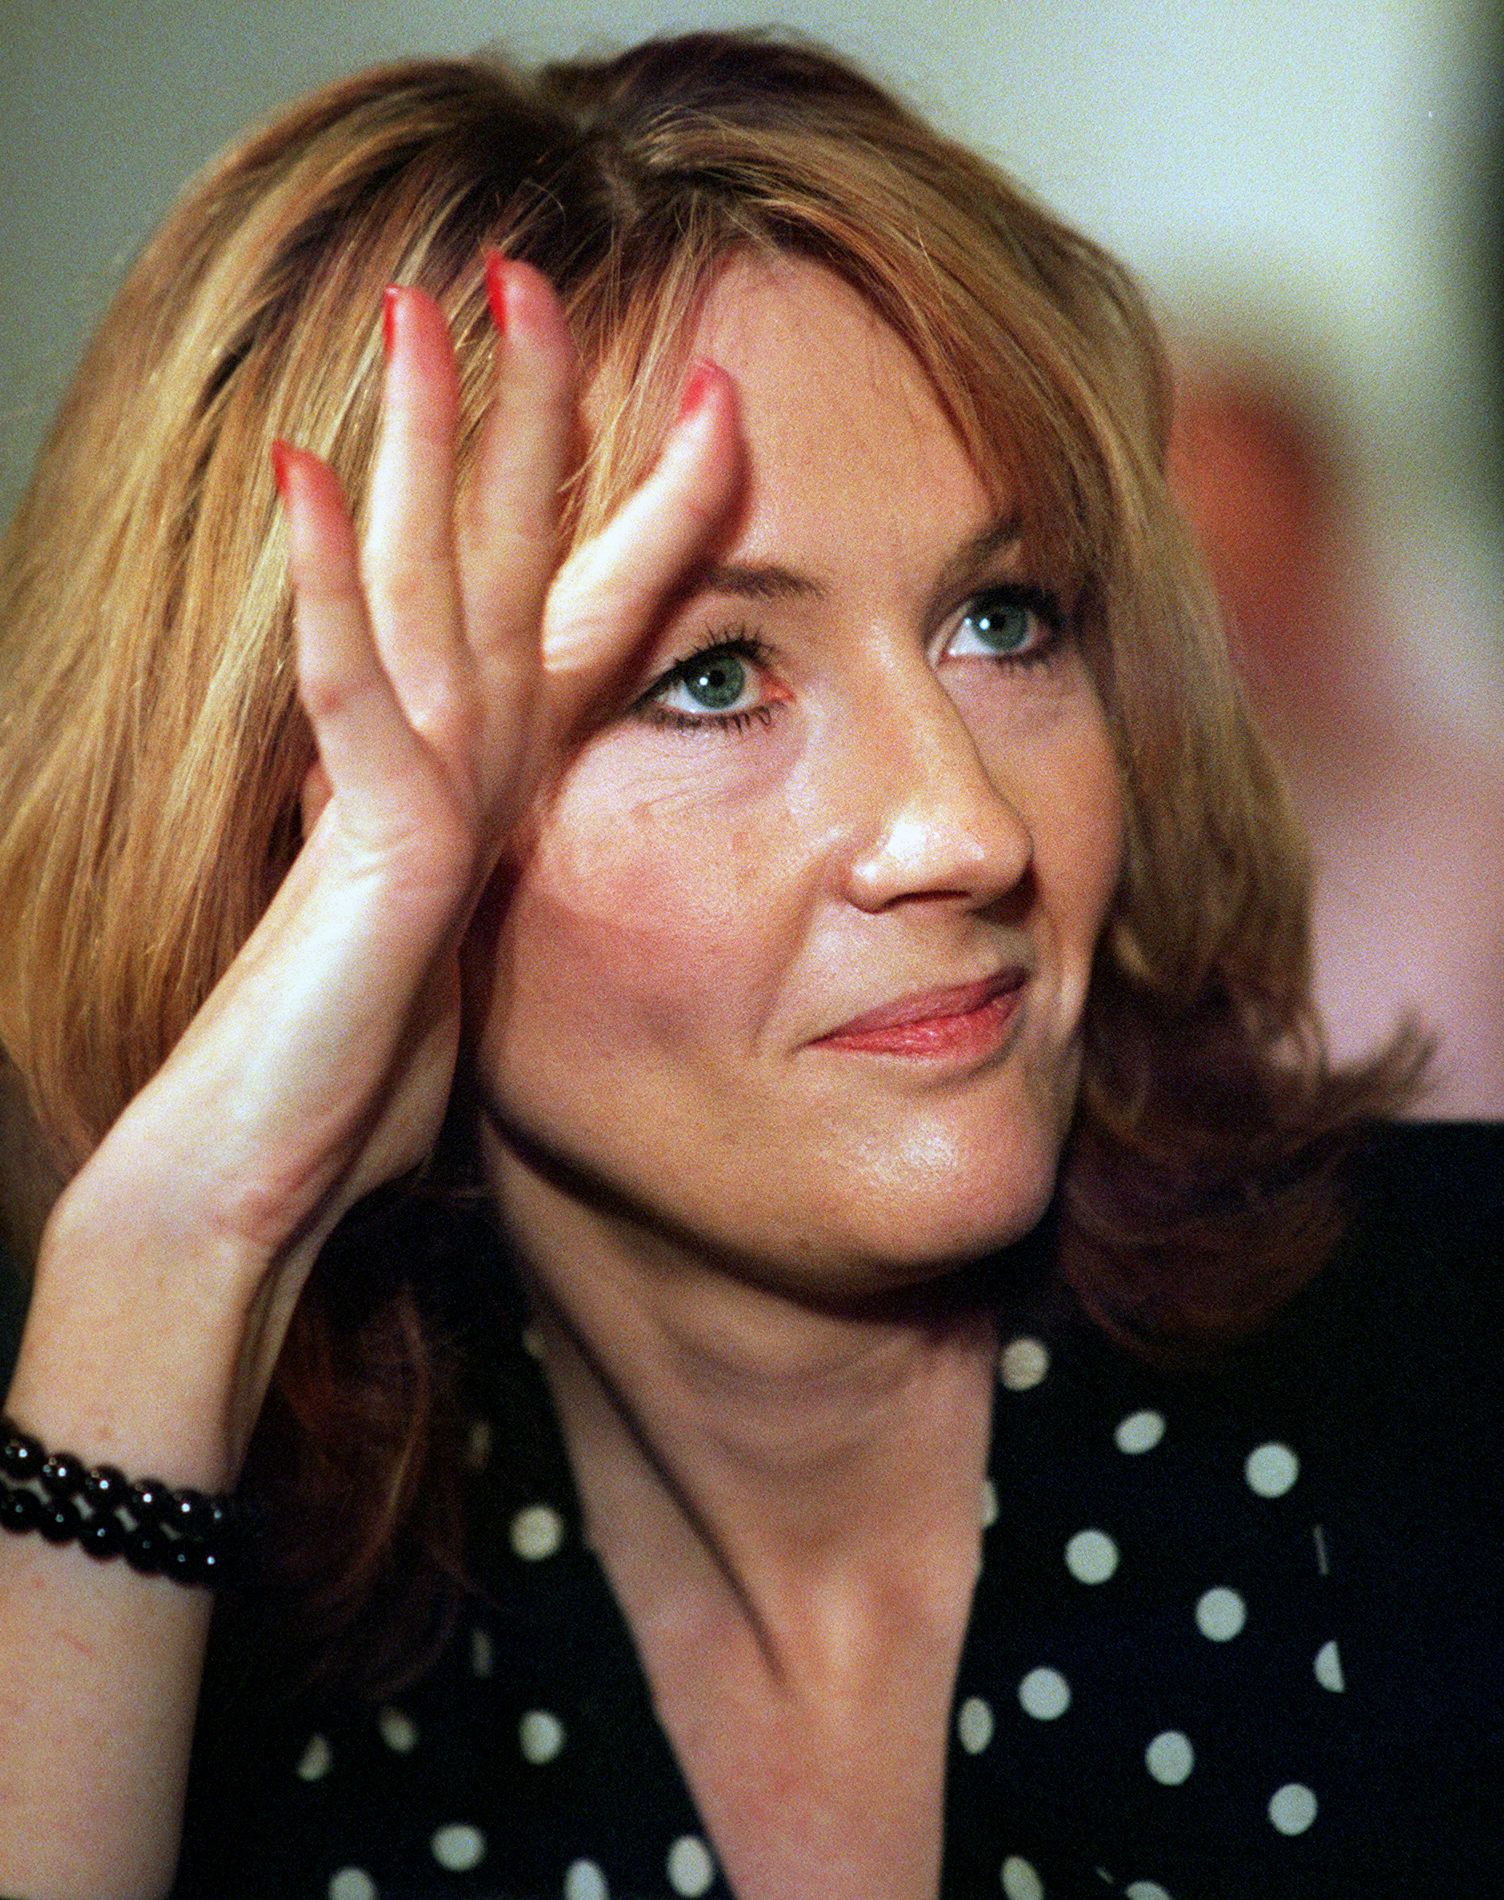 JK Rowling at a book signing on 20 October 1999 in Washington, DC. | Source: Getty Images